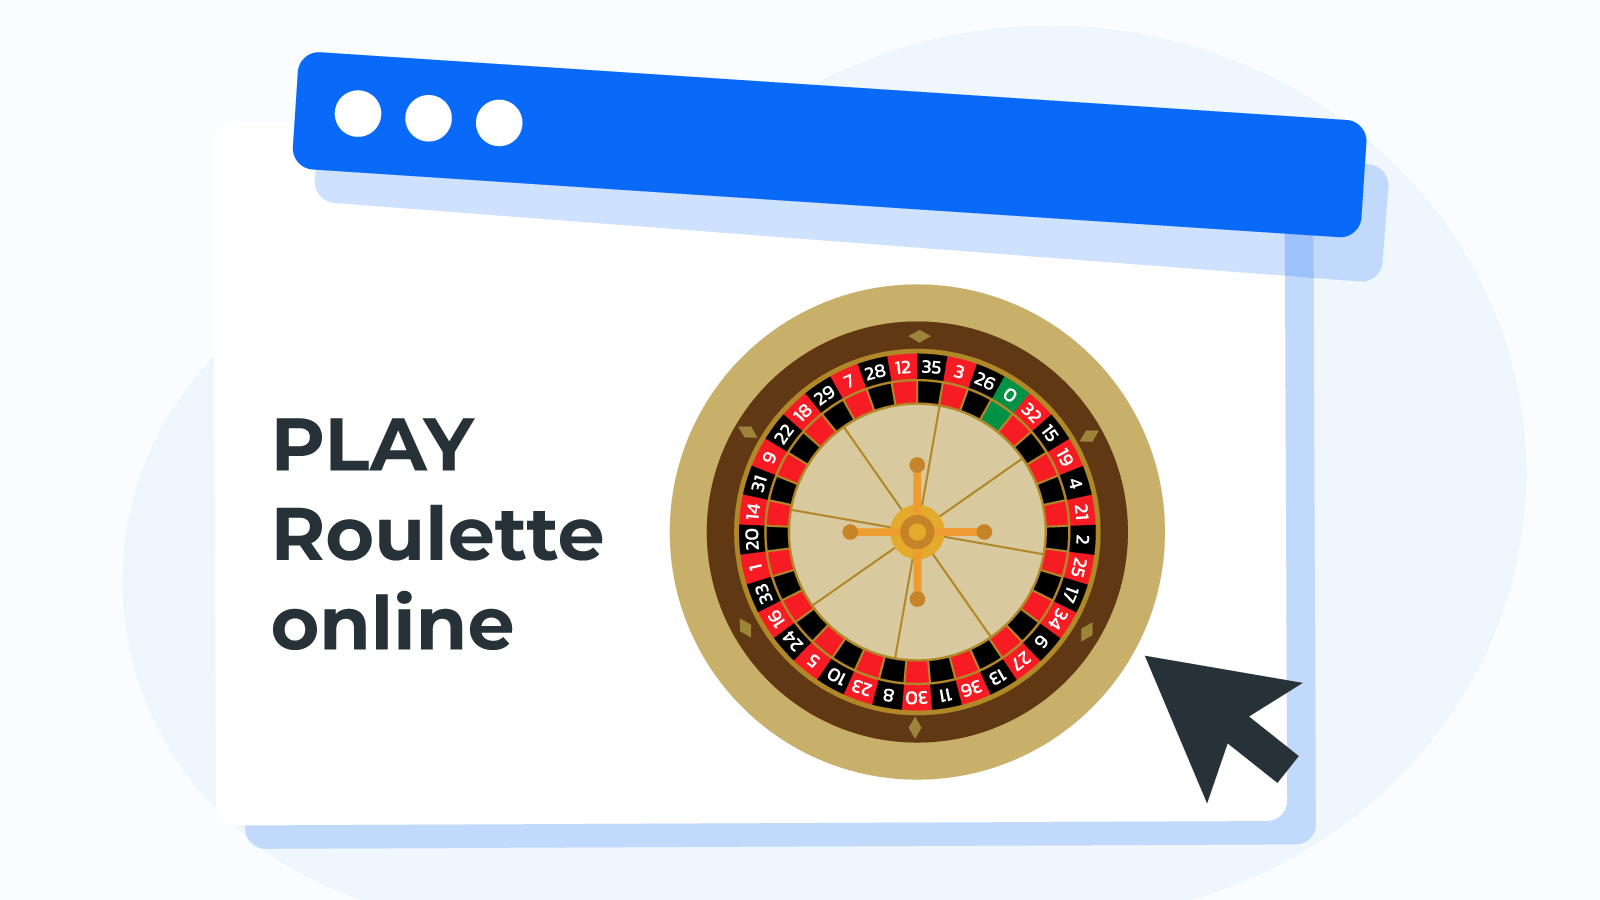 Why play Roulette online